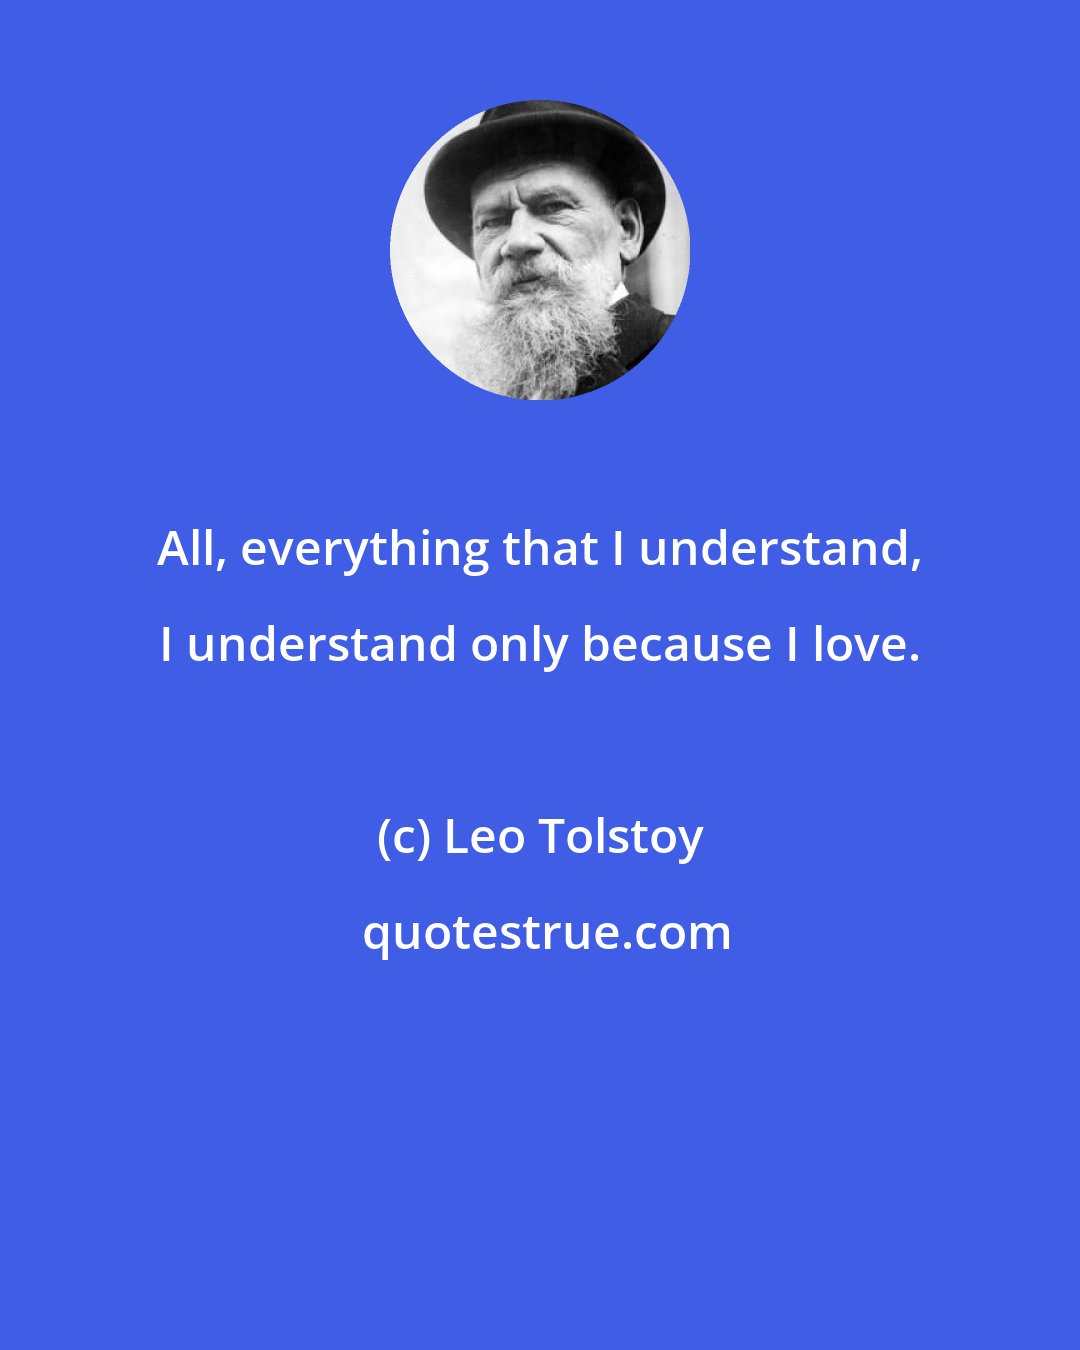 Leo Tolstoy: All, everything that I understand, I understand only because I love.